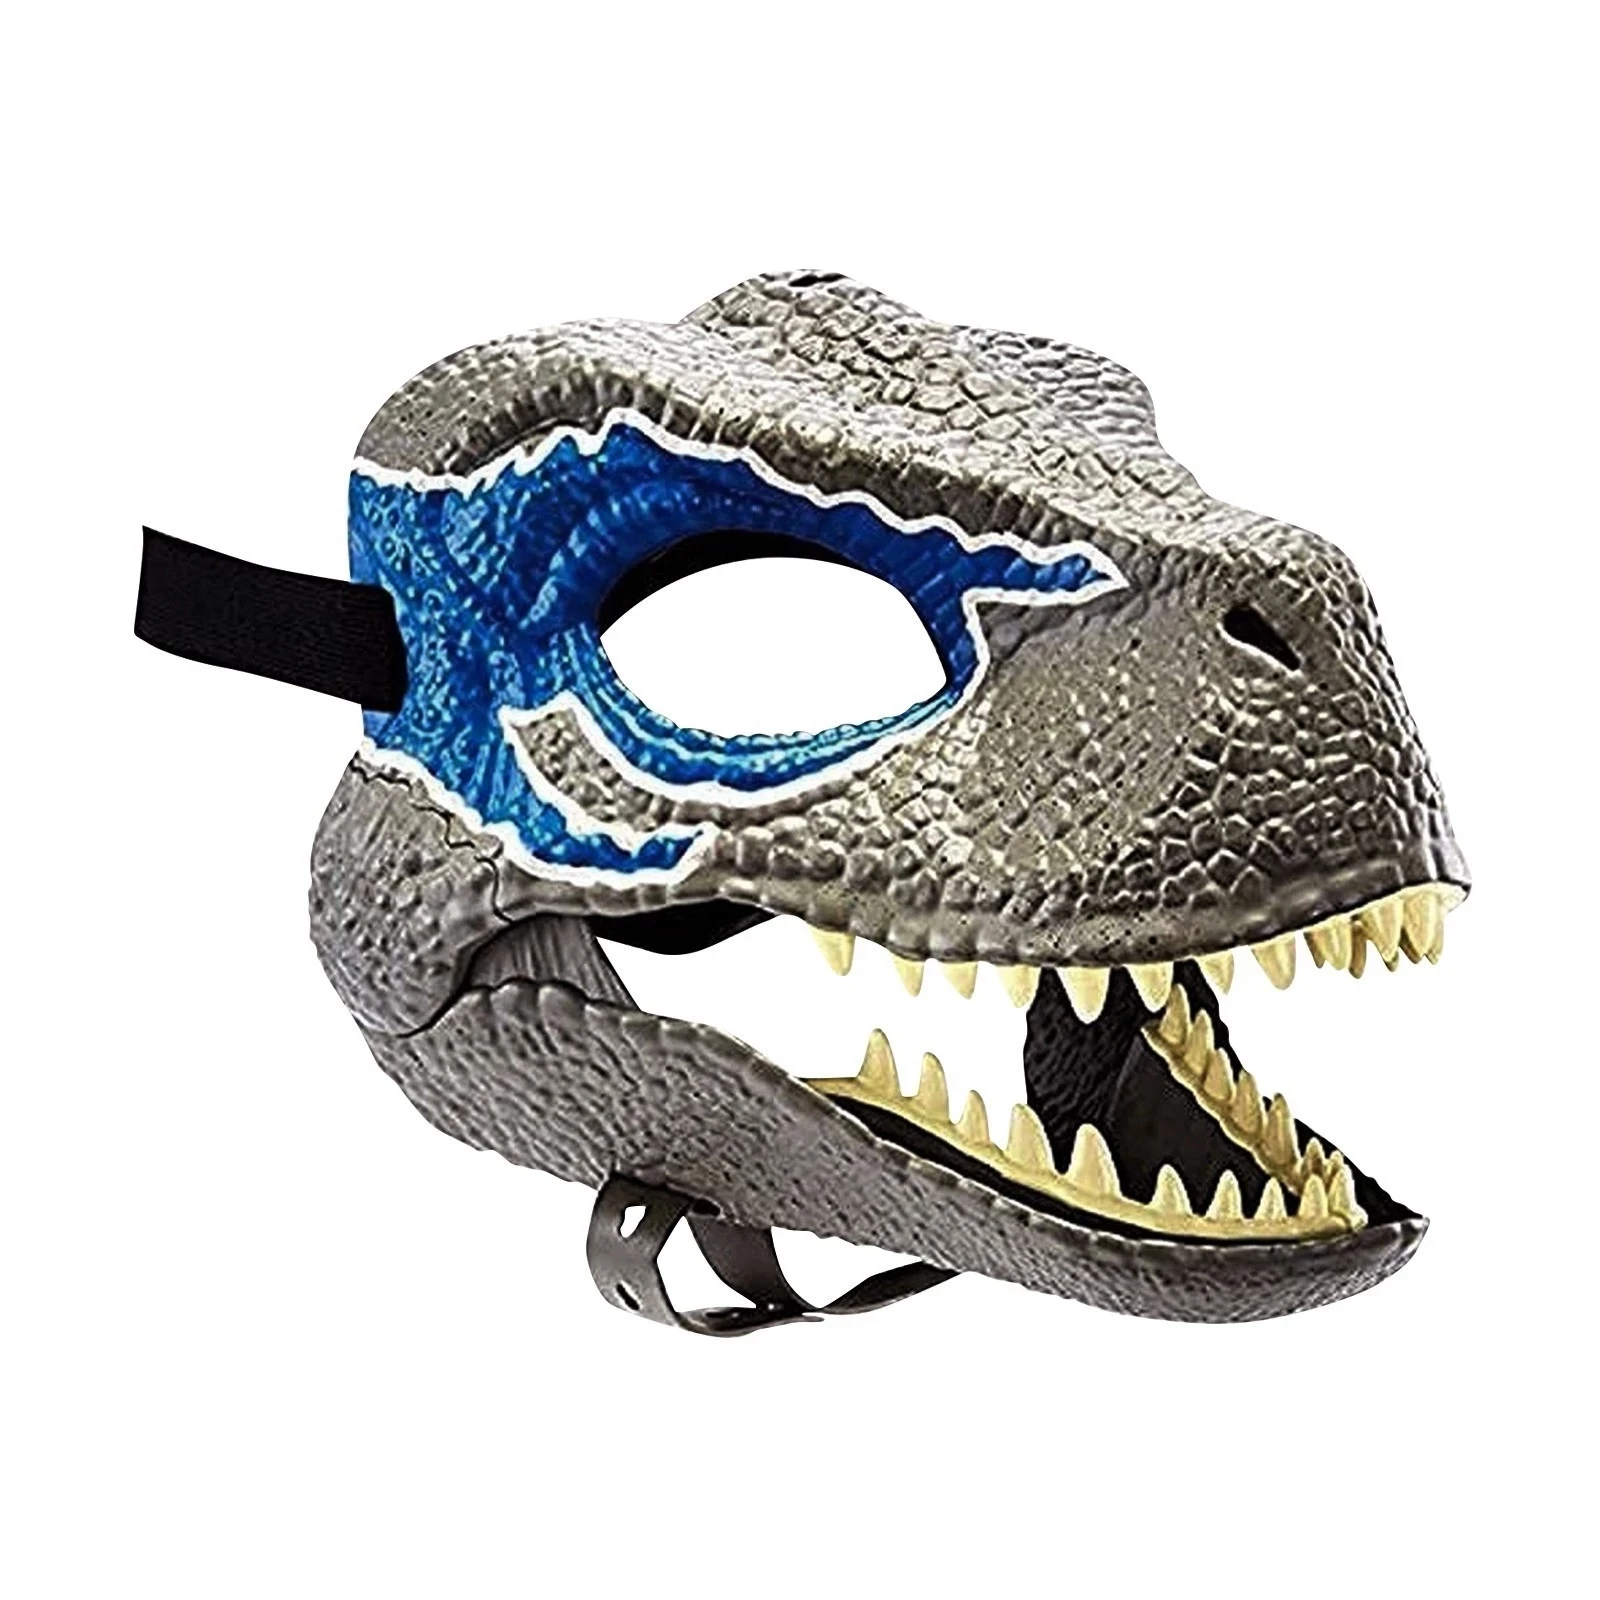 Dragon Dinosaur Jaw Mask Open Mouth Latex Horror Dinosaur Headgear Dino Mask Halloween Party Cosplay Props Scared Mask